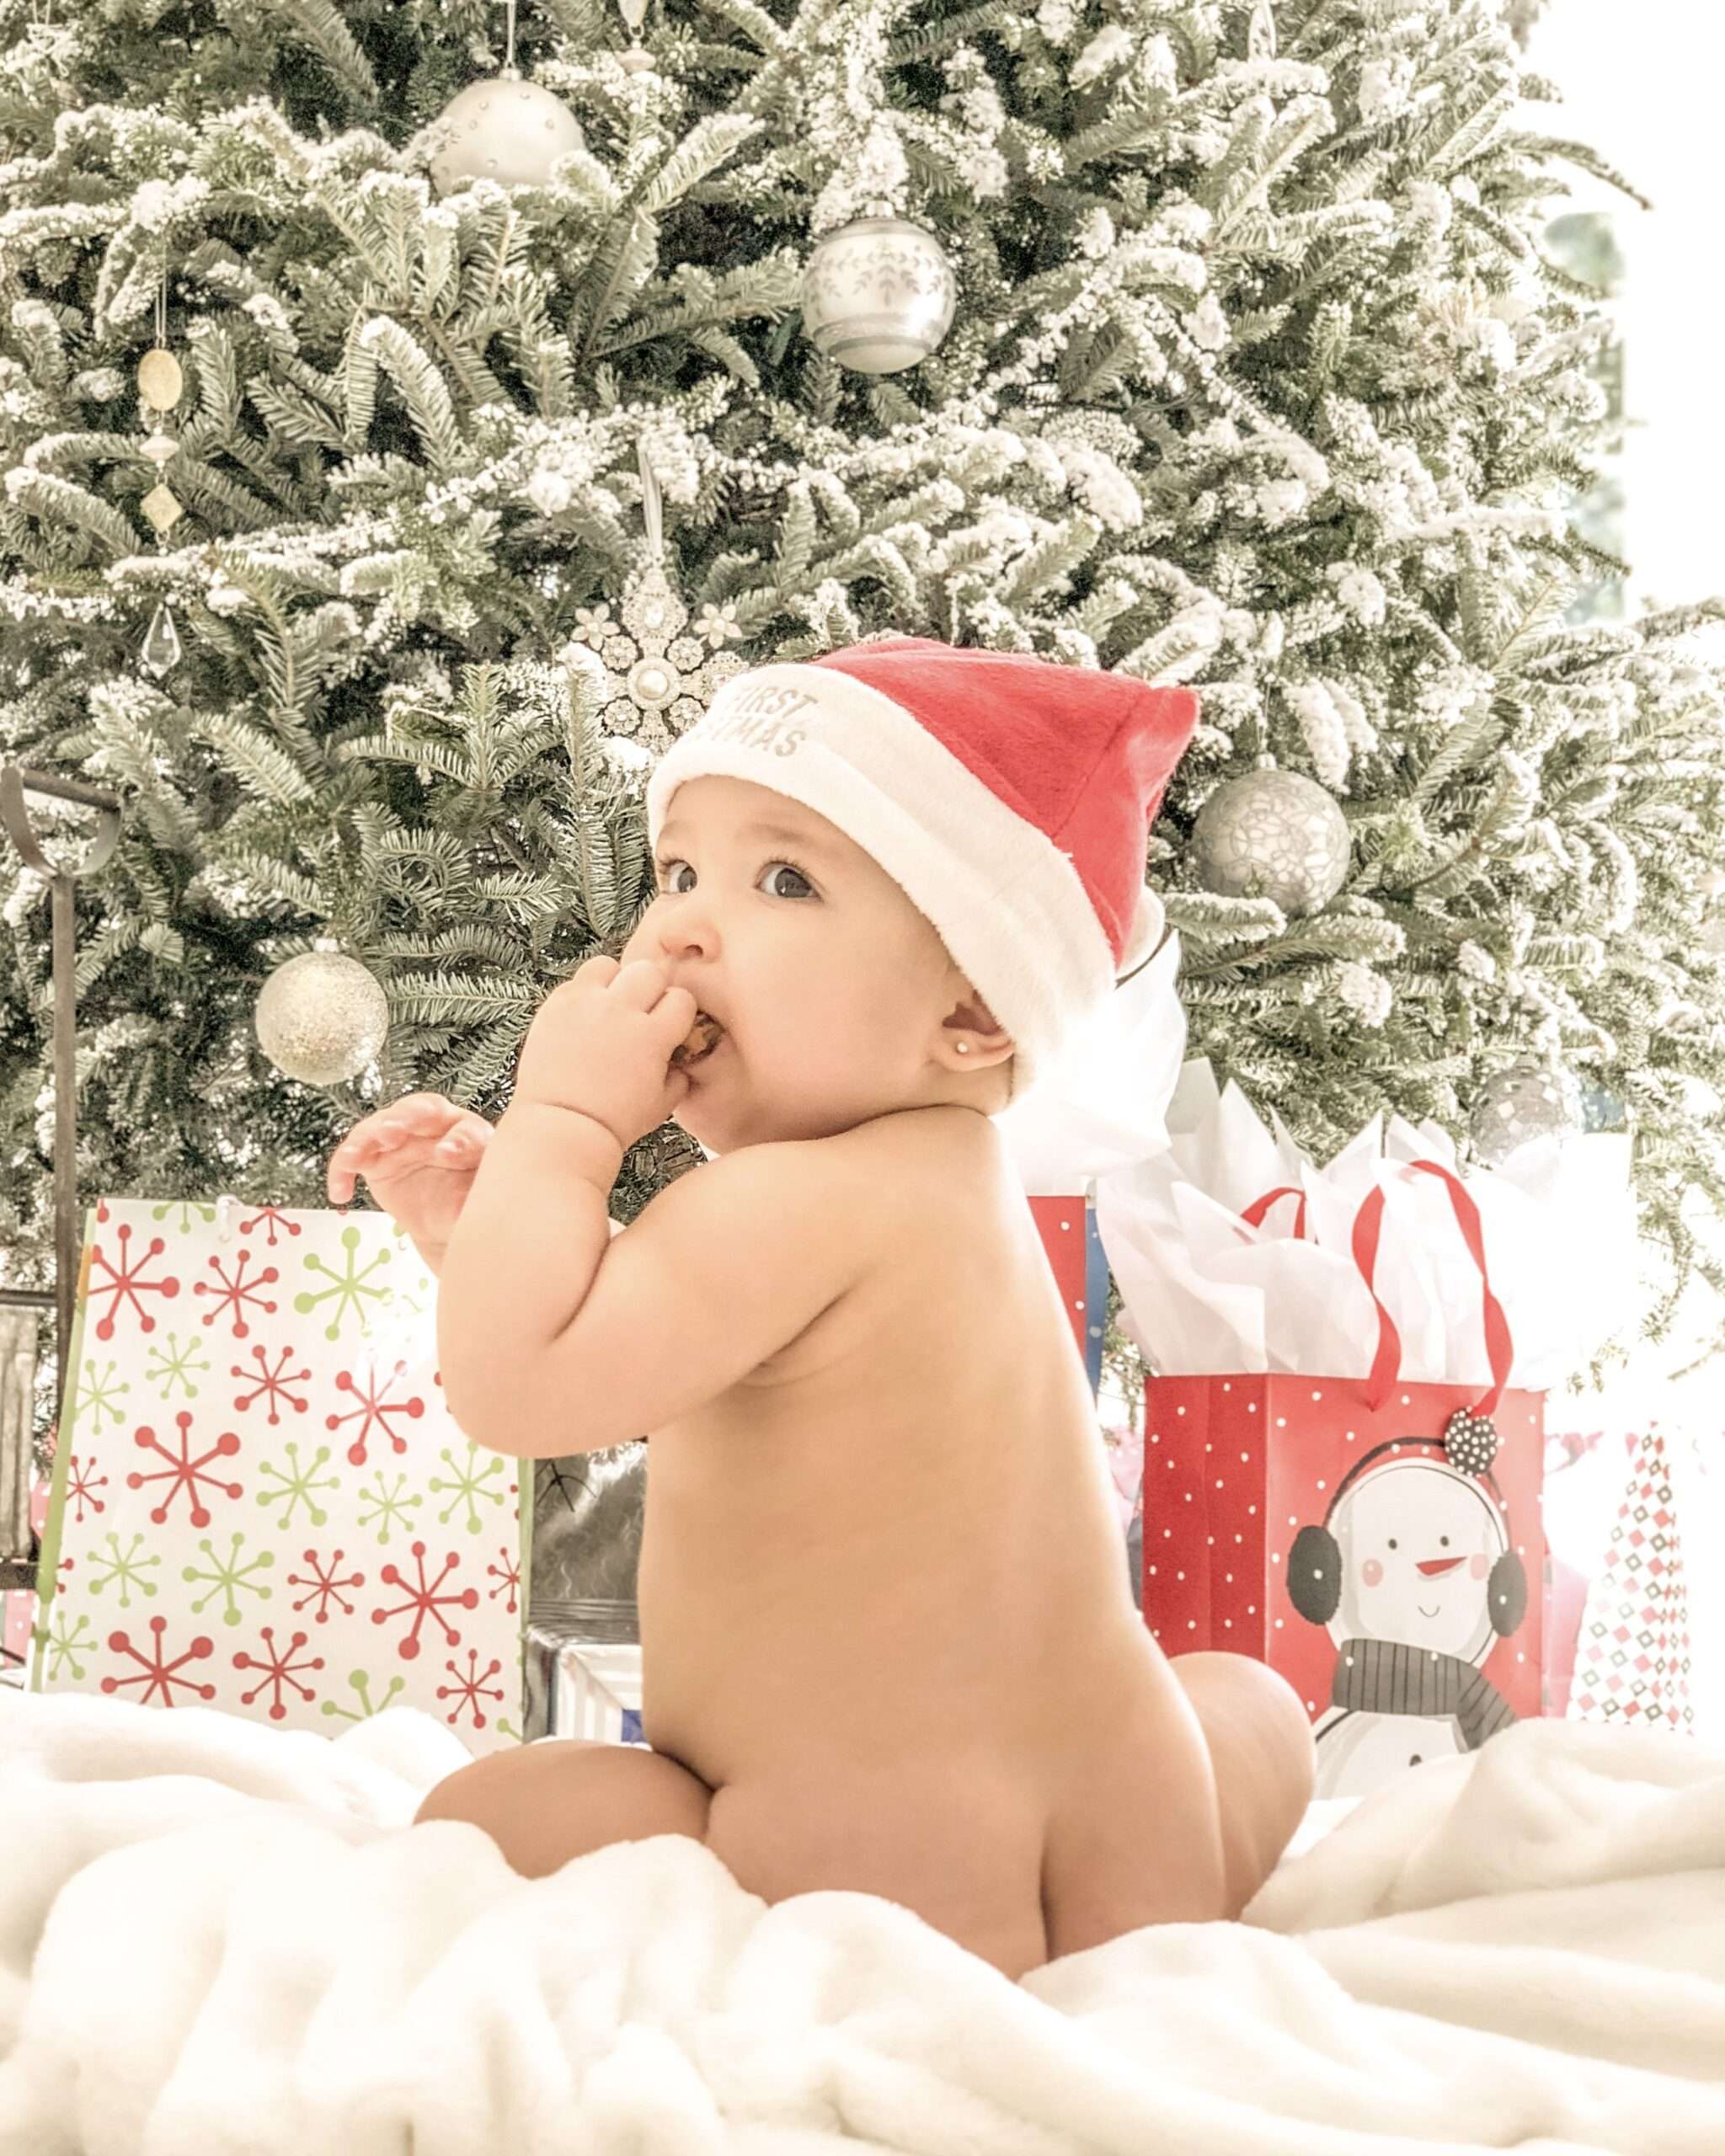 Baby and toddler girl Christmas pictures inspiration at each age. Fun Christmas photos perfect for each age during the holiday time. From baby's first Christmas, to meeting Santa and becoming a big girl with her own christmas tree in her room. #ChristmasPictures #ChristmasInspo #ChristmasBaby #Santa #Babys1stChristmas 